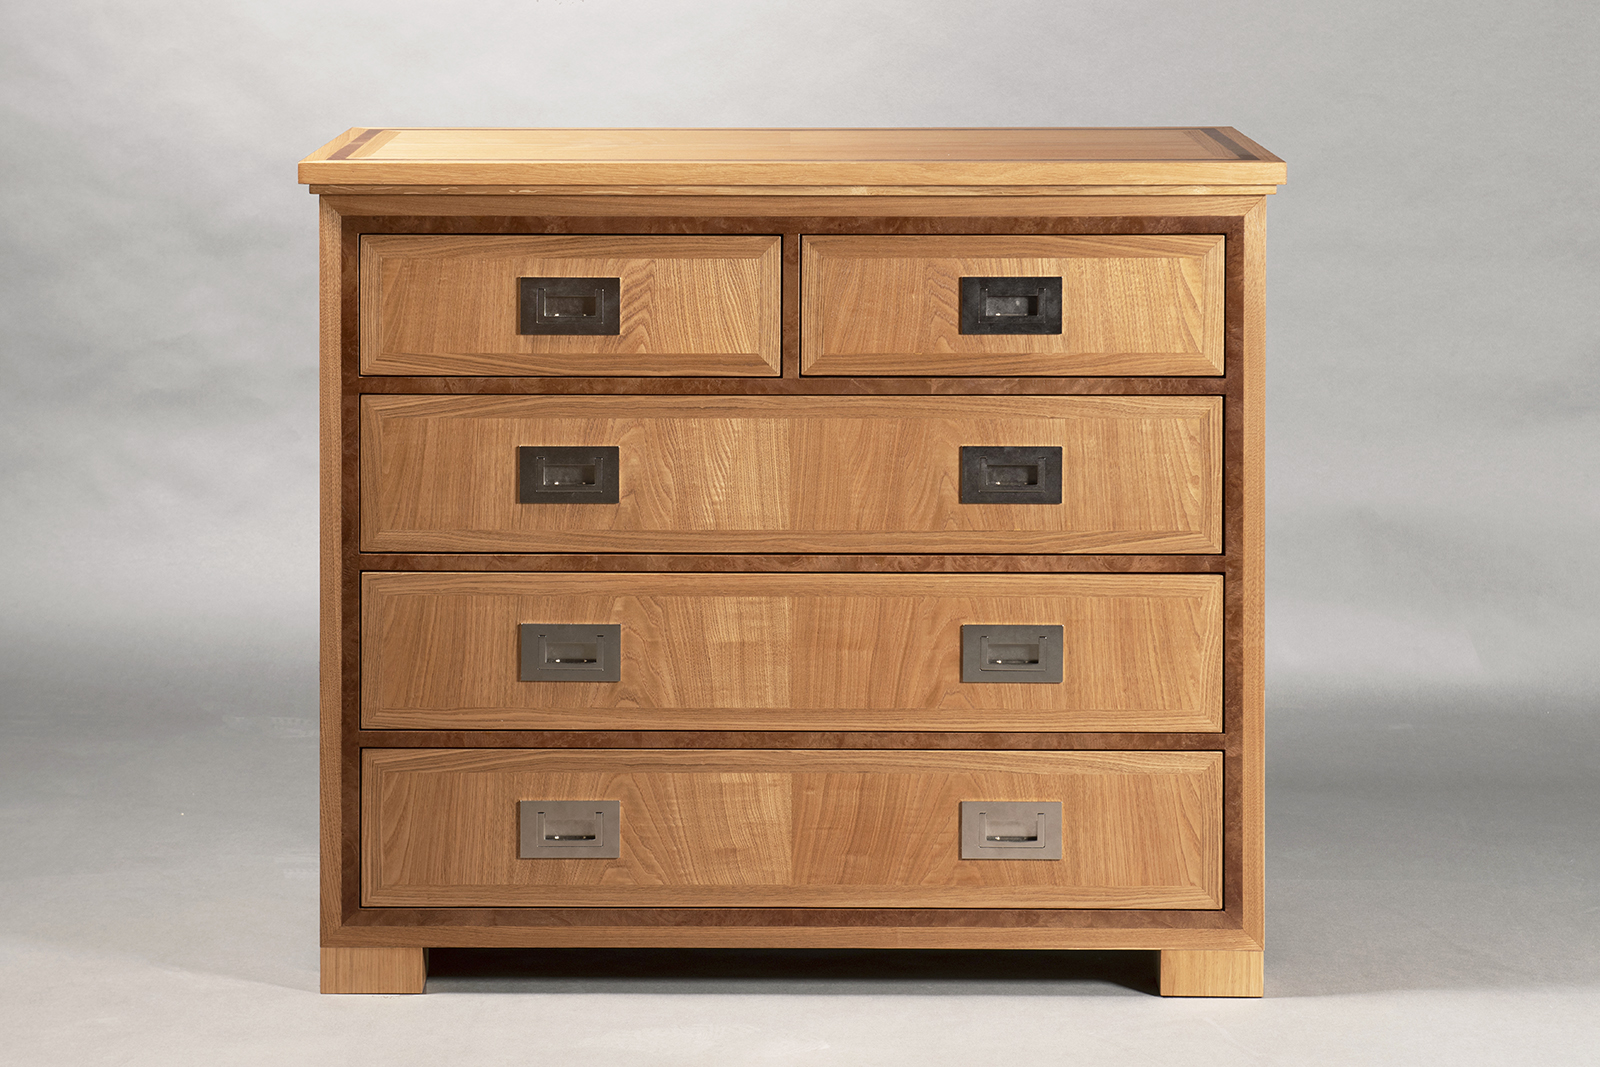 A Modernist Chest of Drawers by ILIAD Design